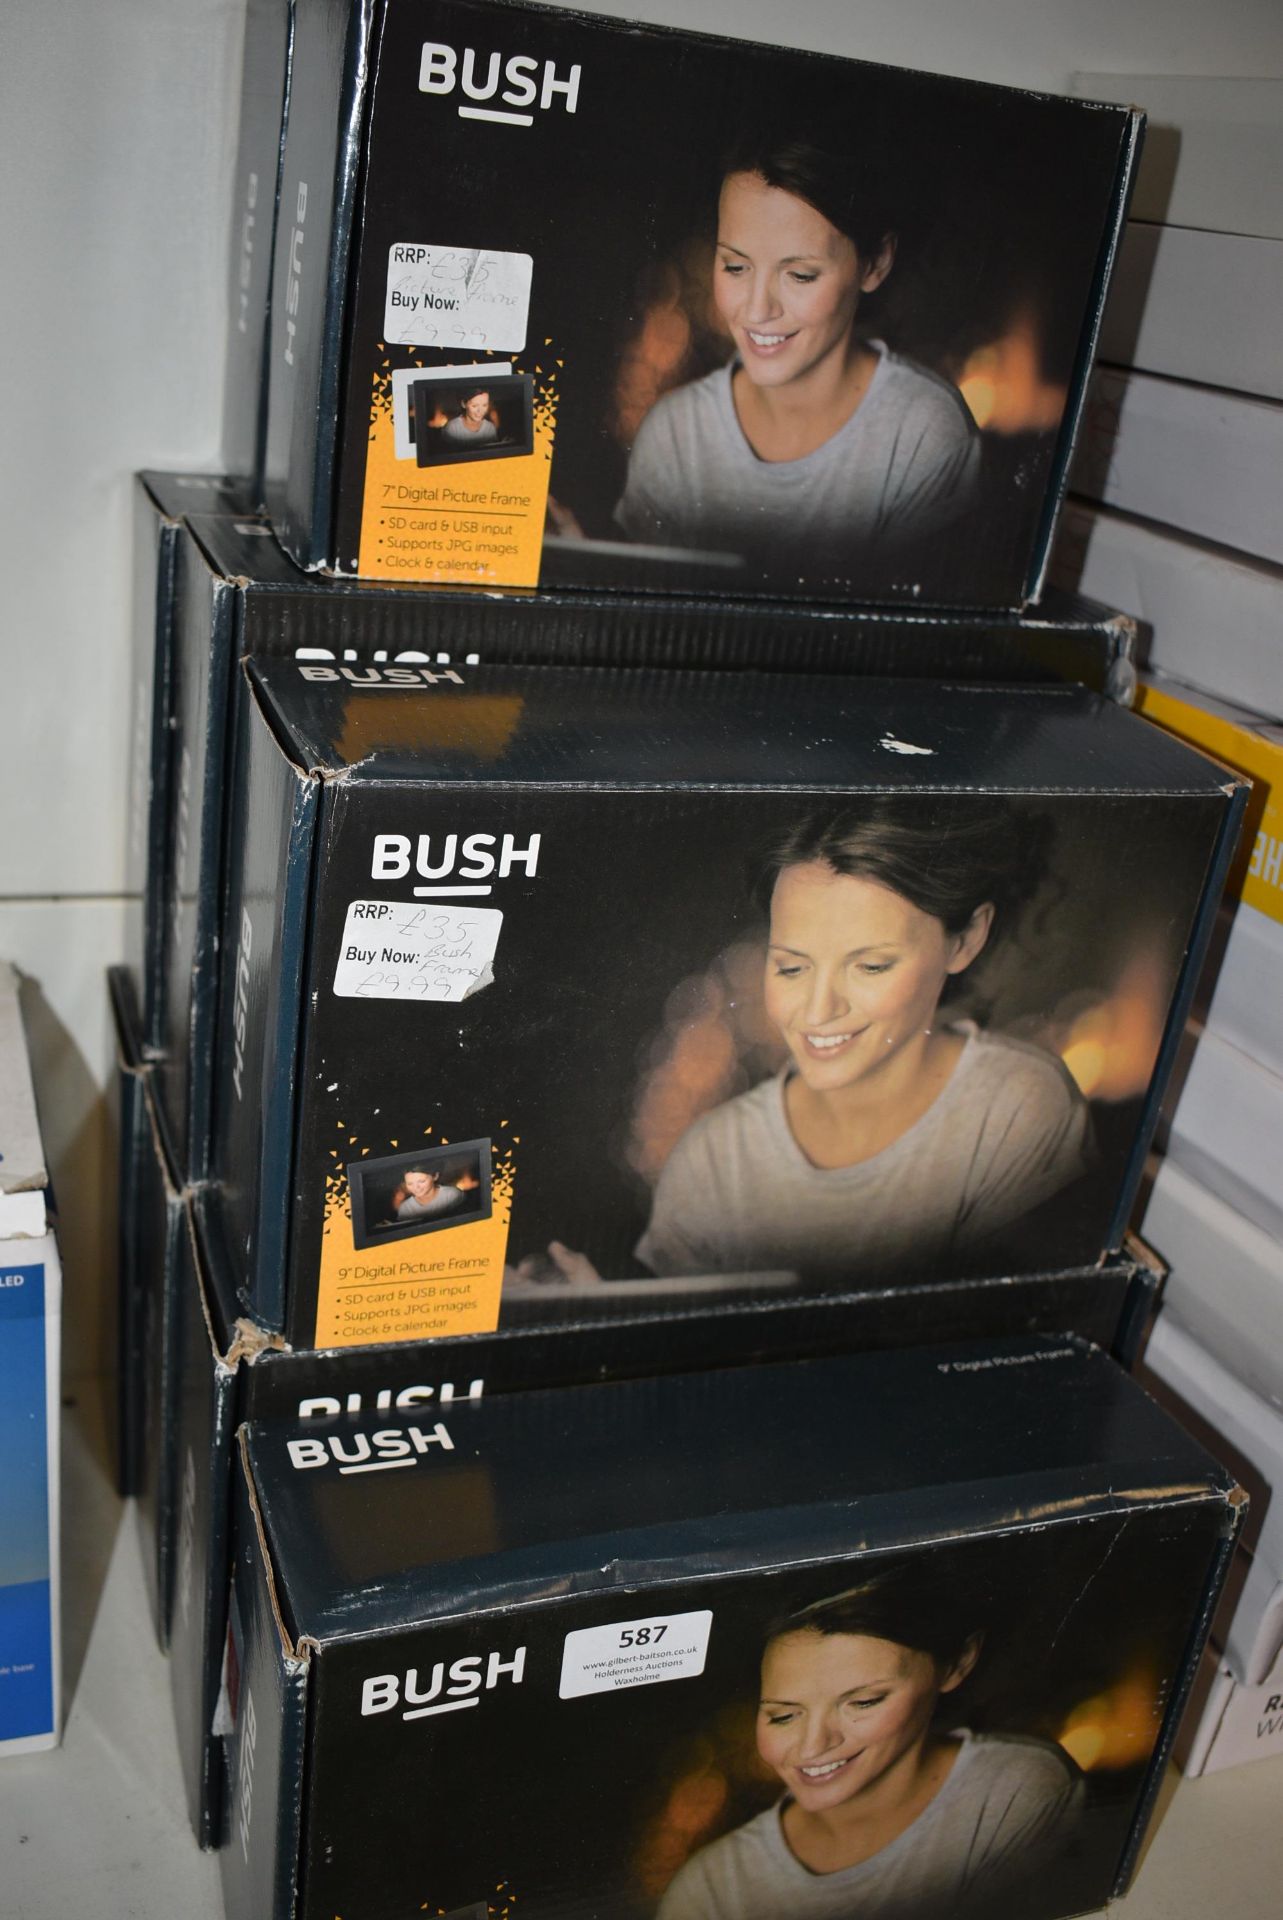 Eight Bush 9” Digital Picture Frames - Image 2 of 4